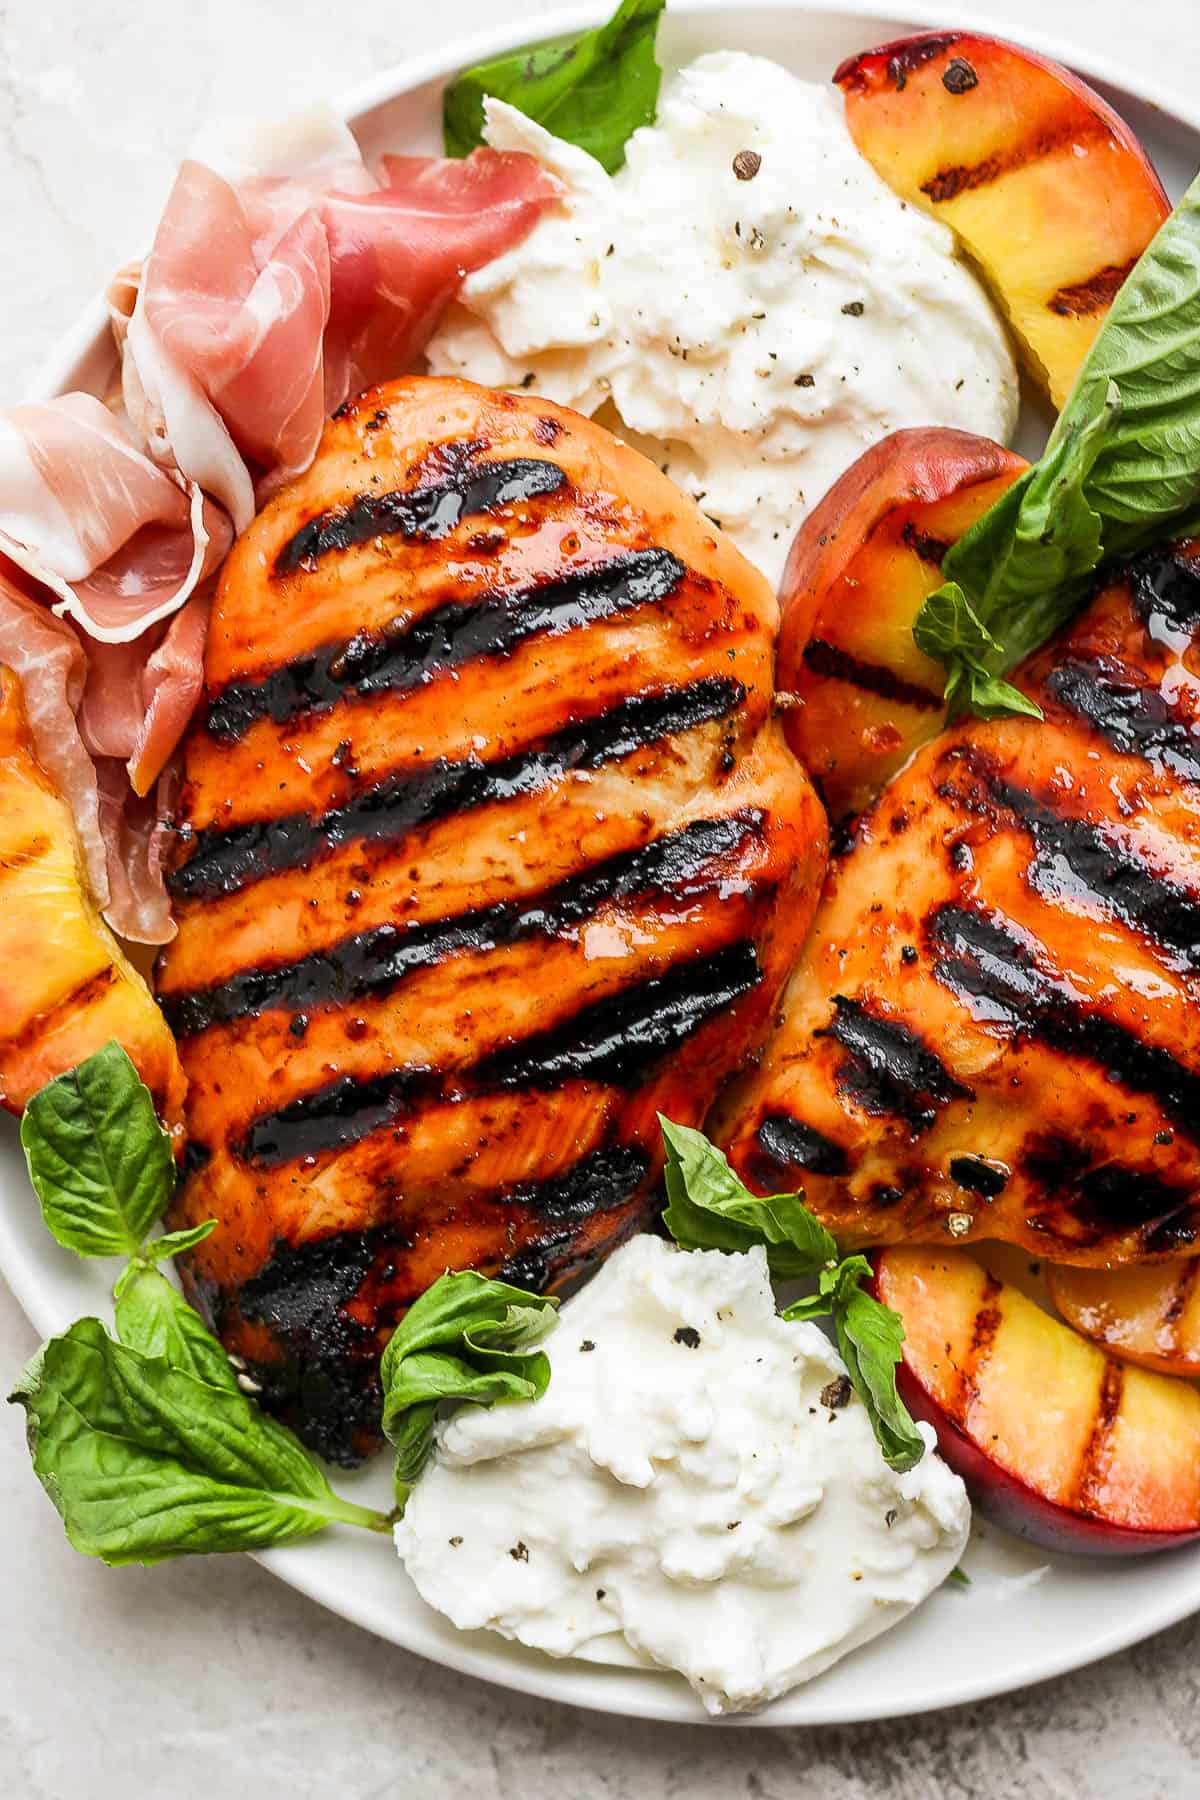 Two grilled chicken breasts on a plate garnished with fresh basil leaves, burrata cheese, grilled peaches, and prosciutto.